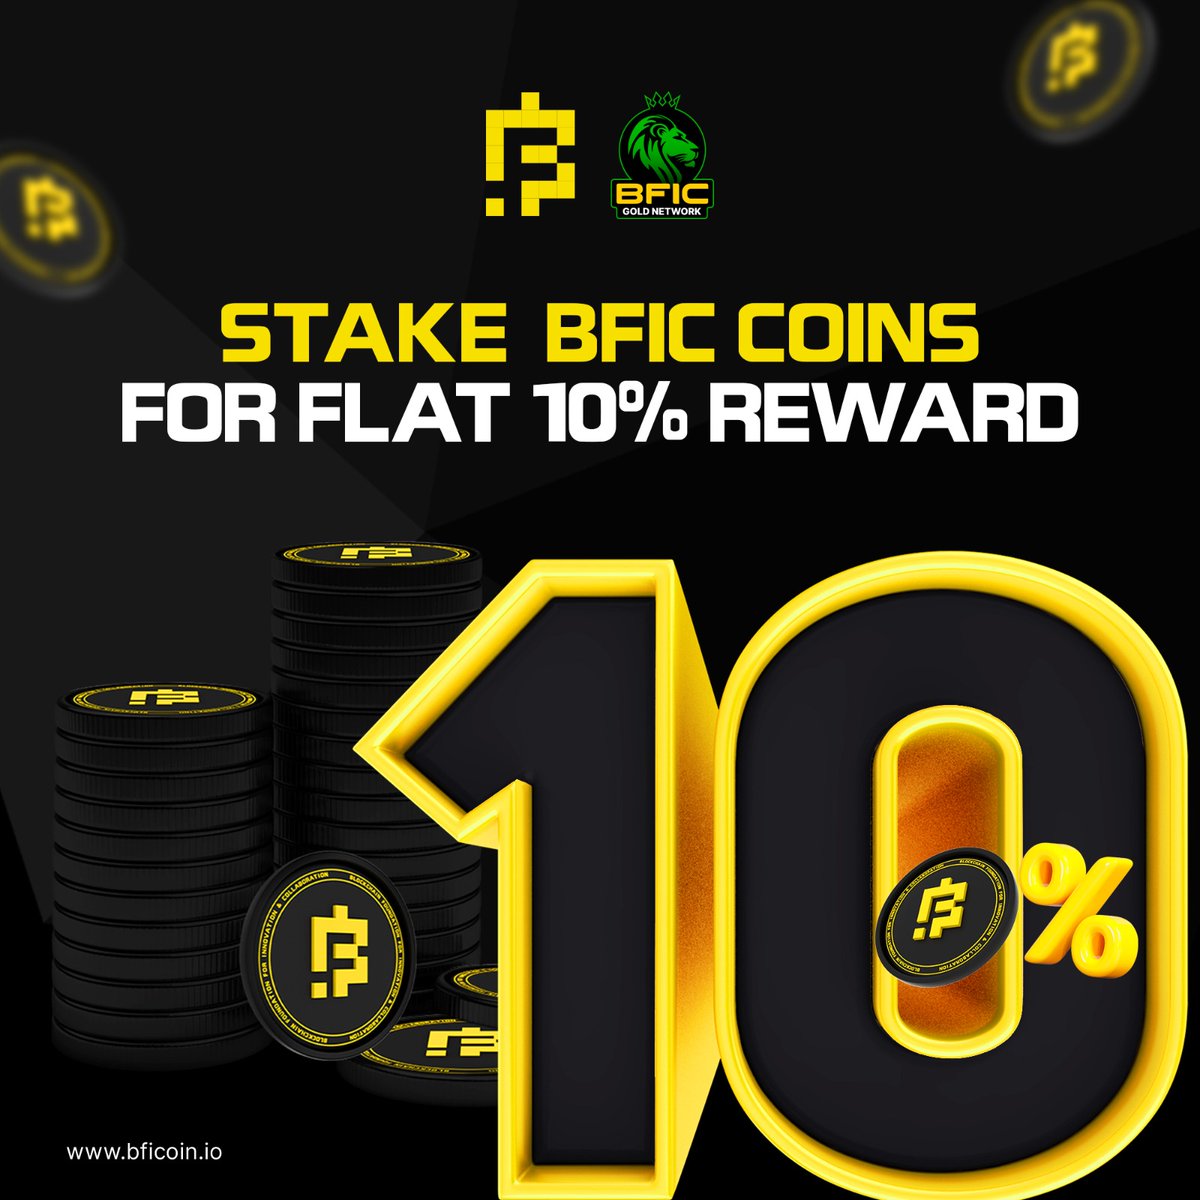 Step into the world of limitless possibilities with the BFIC Gold Network app & 
Experience the power of BFIC coins on the BFIC Gold Network app! 💣

Unlock a lucrative flat 10% reward by staking BFIC Coins on the BFIC Gold Network!
Download Now!!! 📲

#BFICGoldNetwork #BFIC…